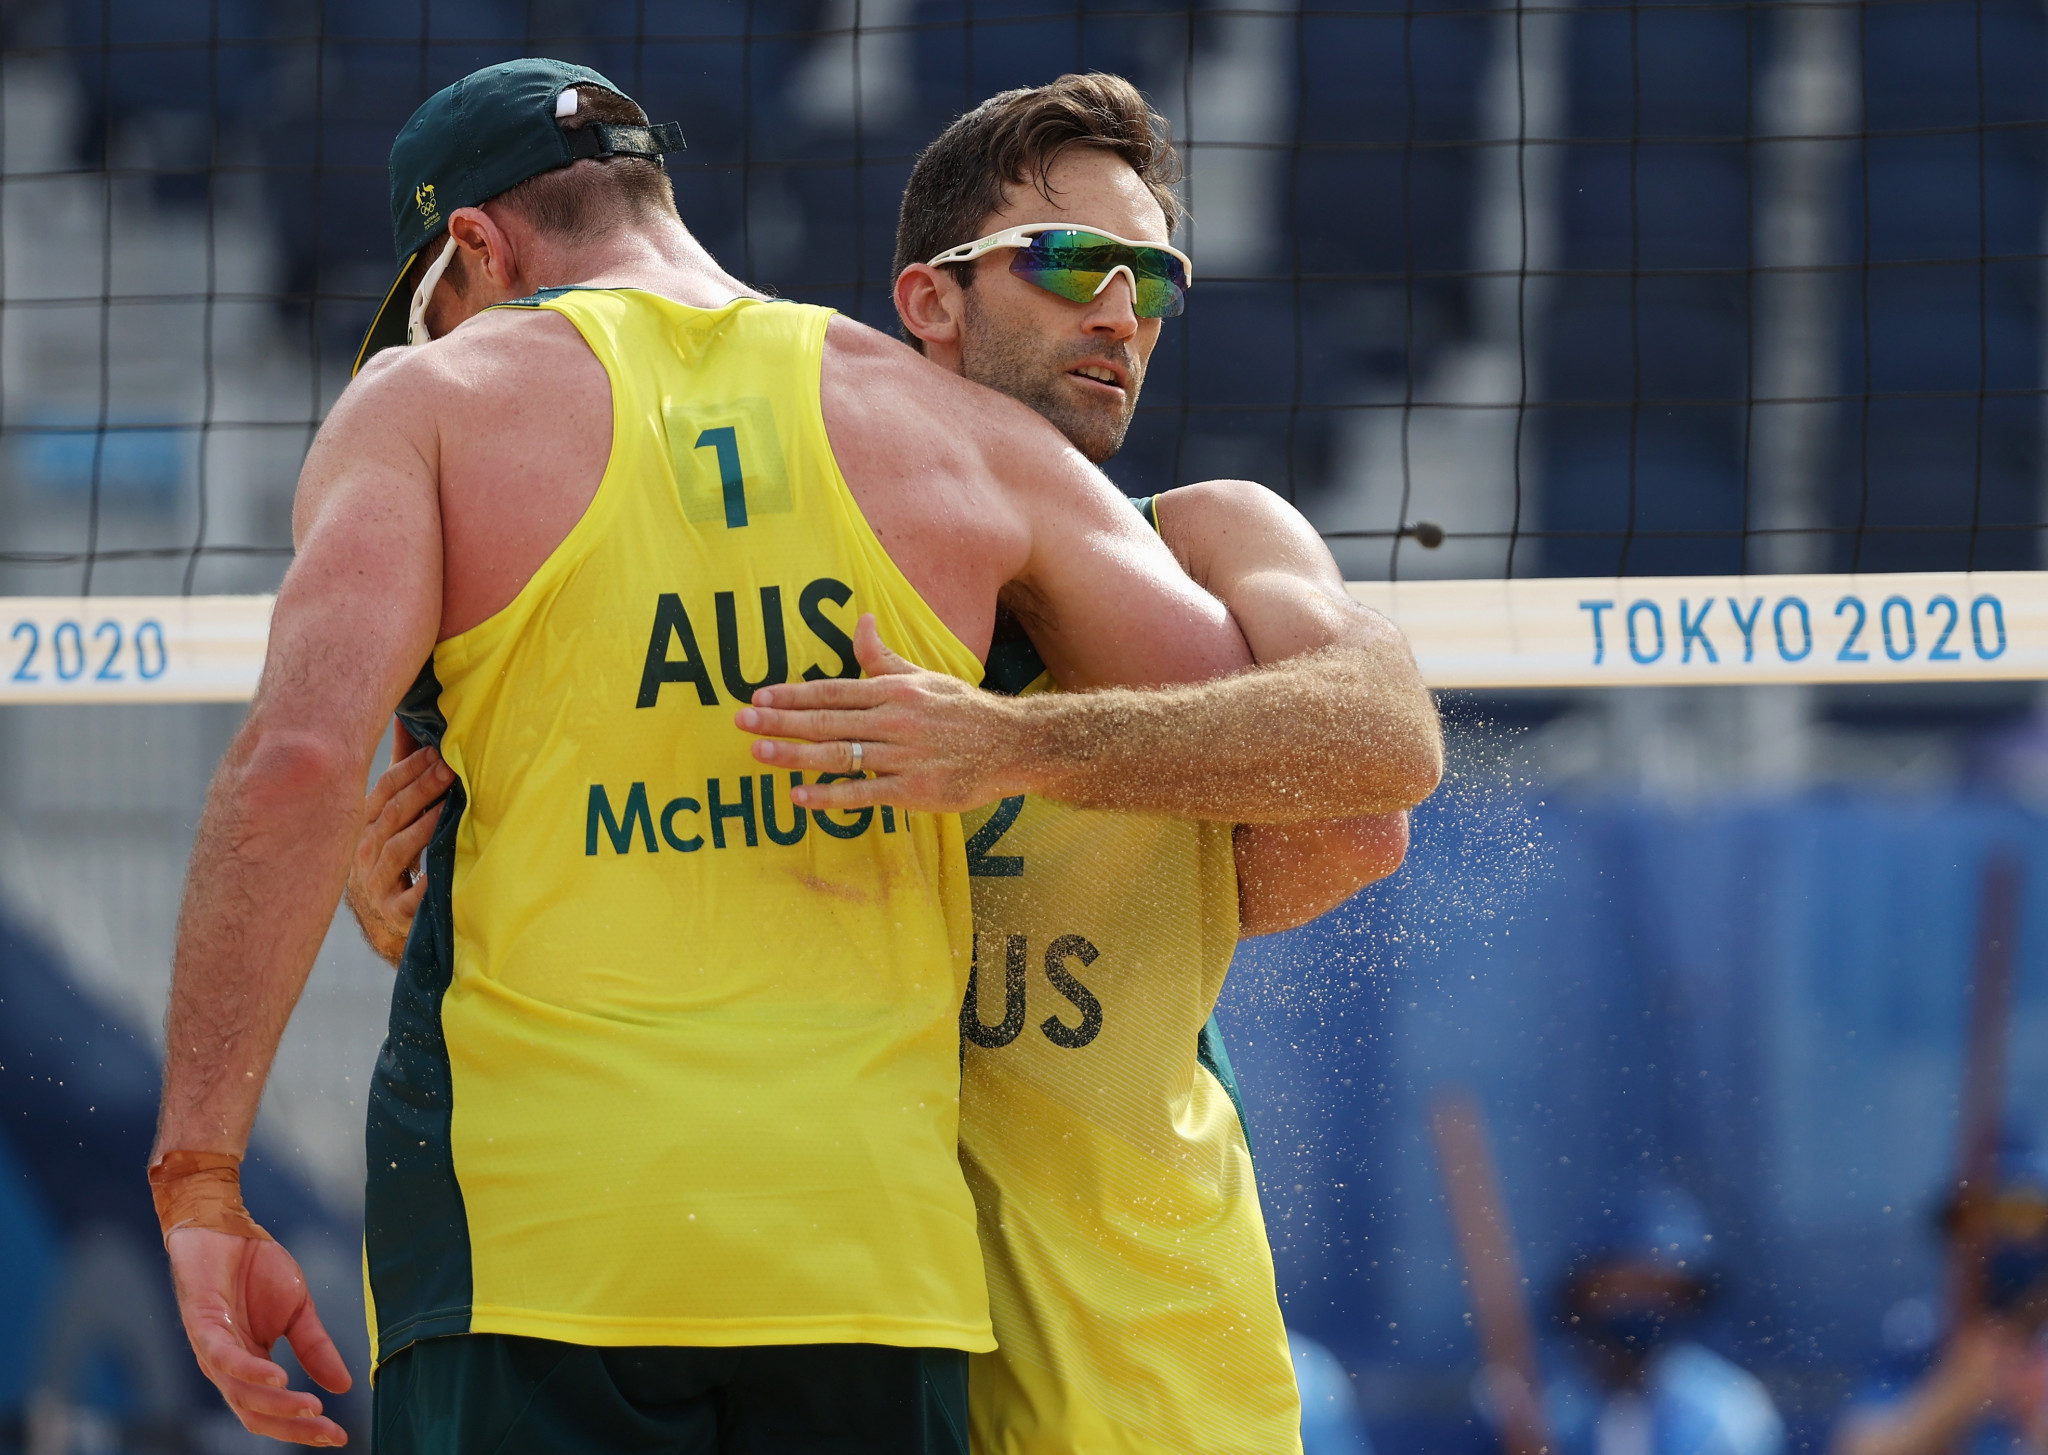 Australia are one of the nations who are set to qualify via the world rankings ©Getty Images